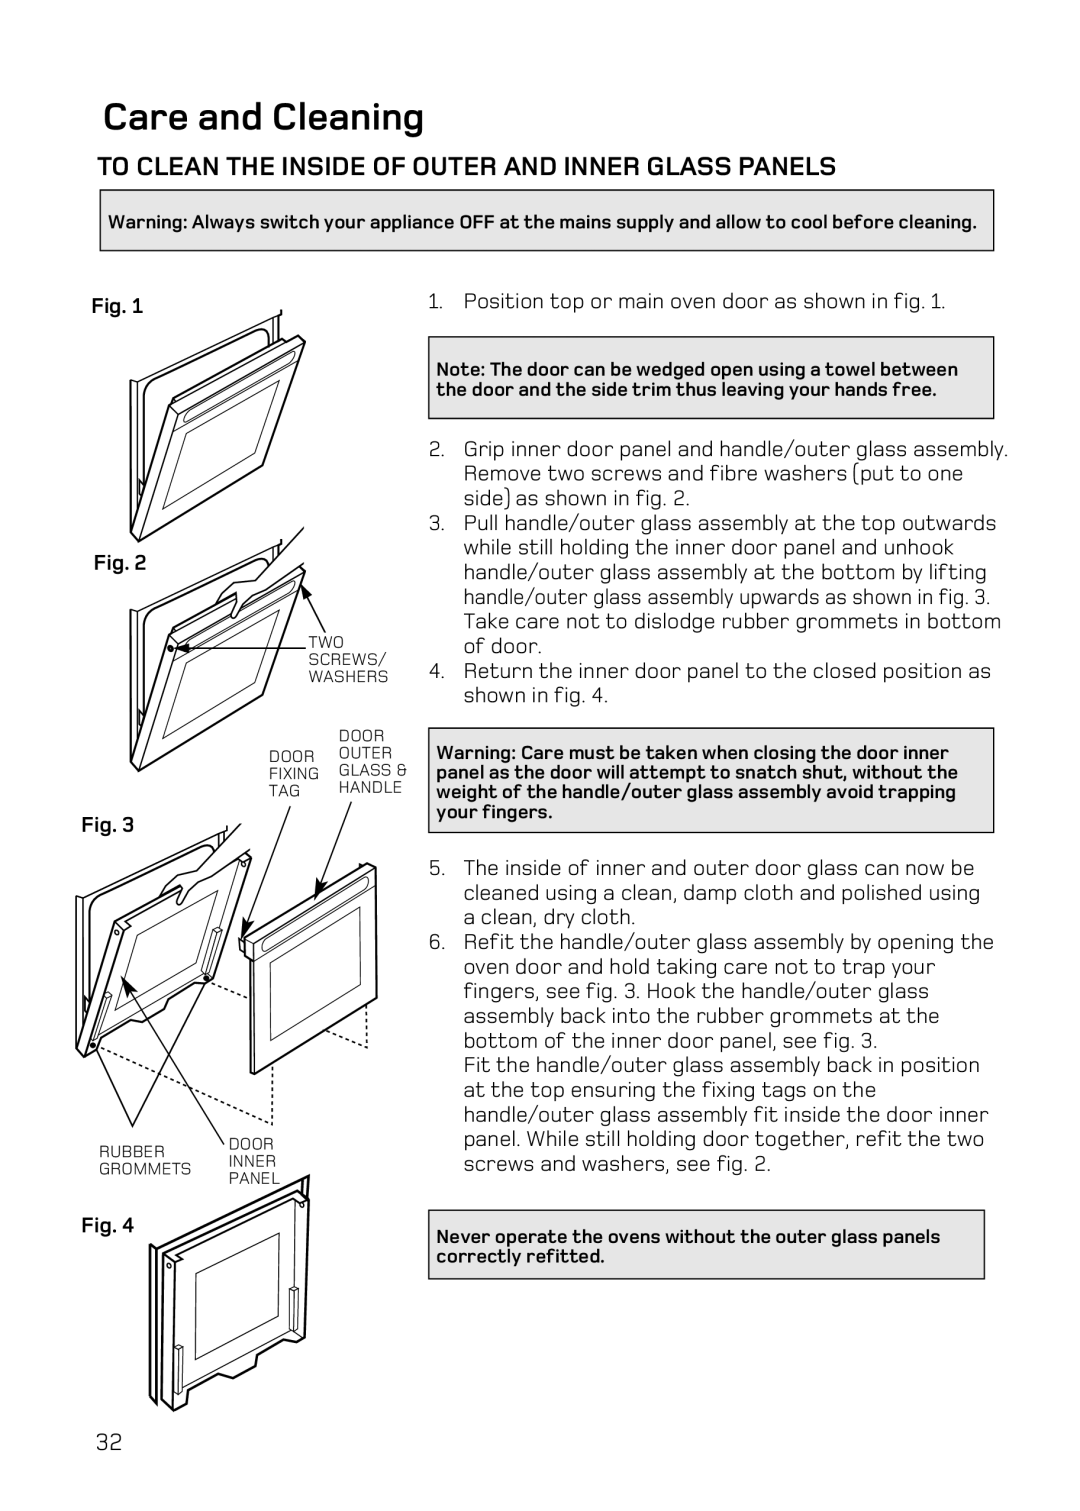 Hotpoint UQ47, UE47 manual To Clean The Inside Of Outer And Inner Glass Panels, Care and Cleaning 